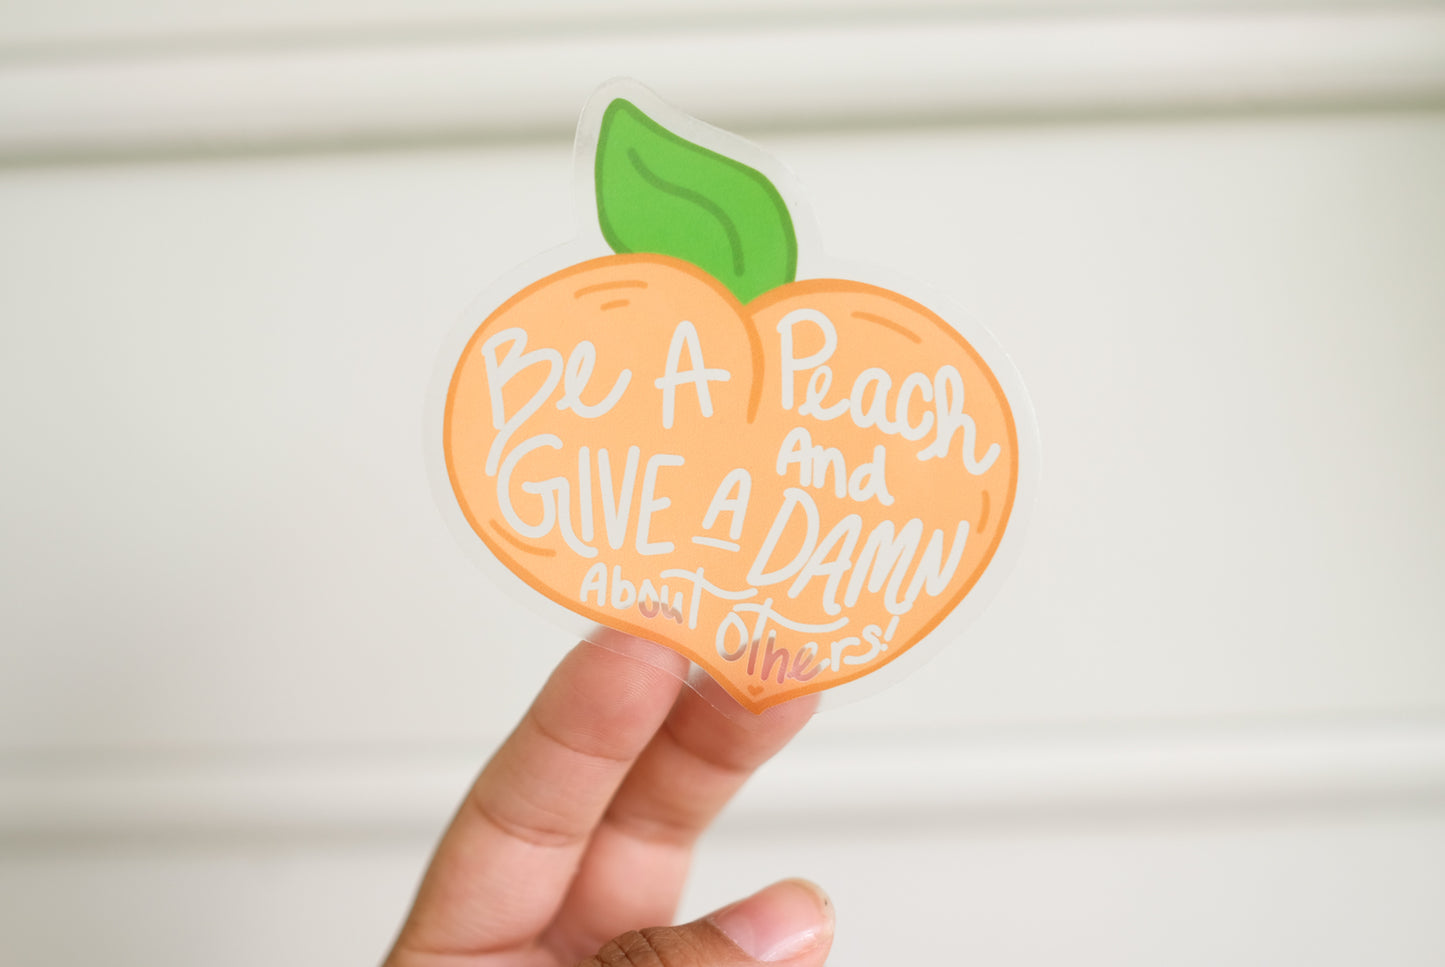 Be A Peach and Give A Damn About Others Transparent Sticker